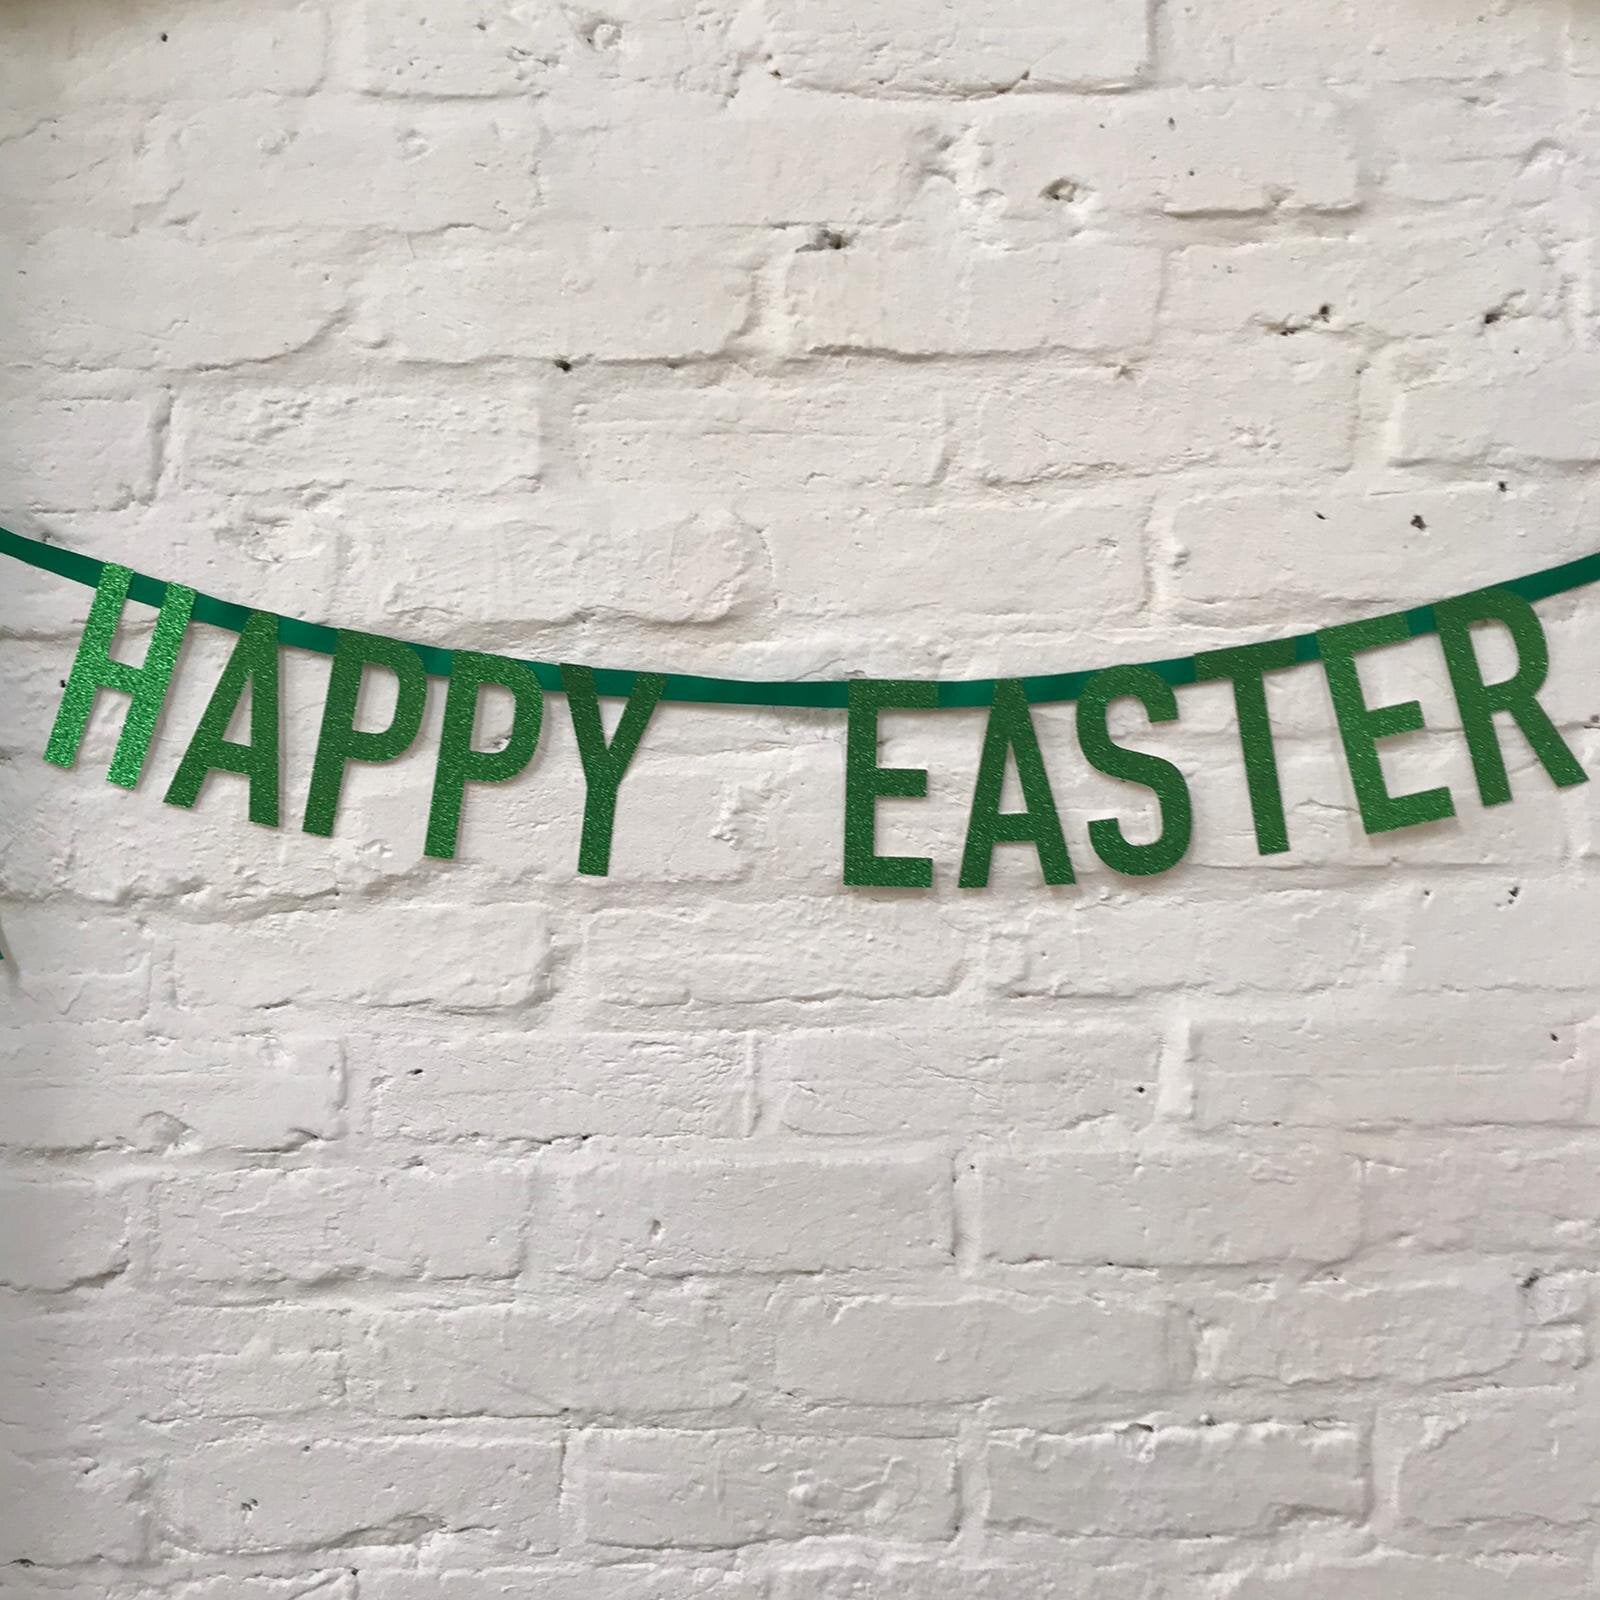 HAPPY EASTER BANNER